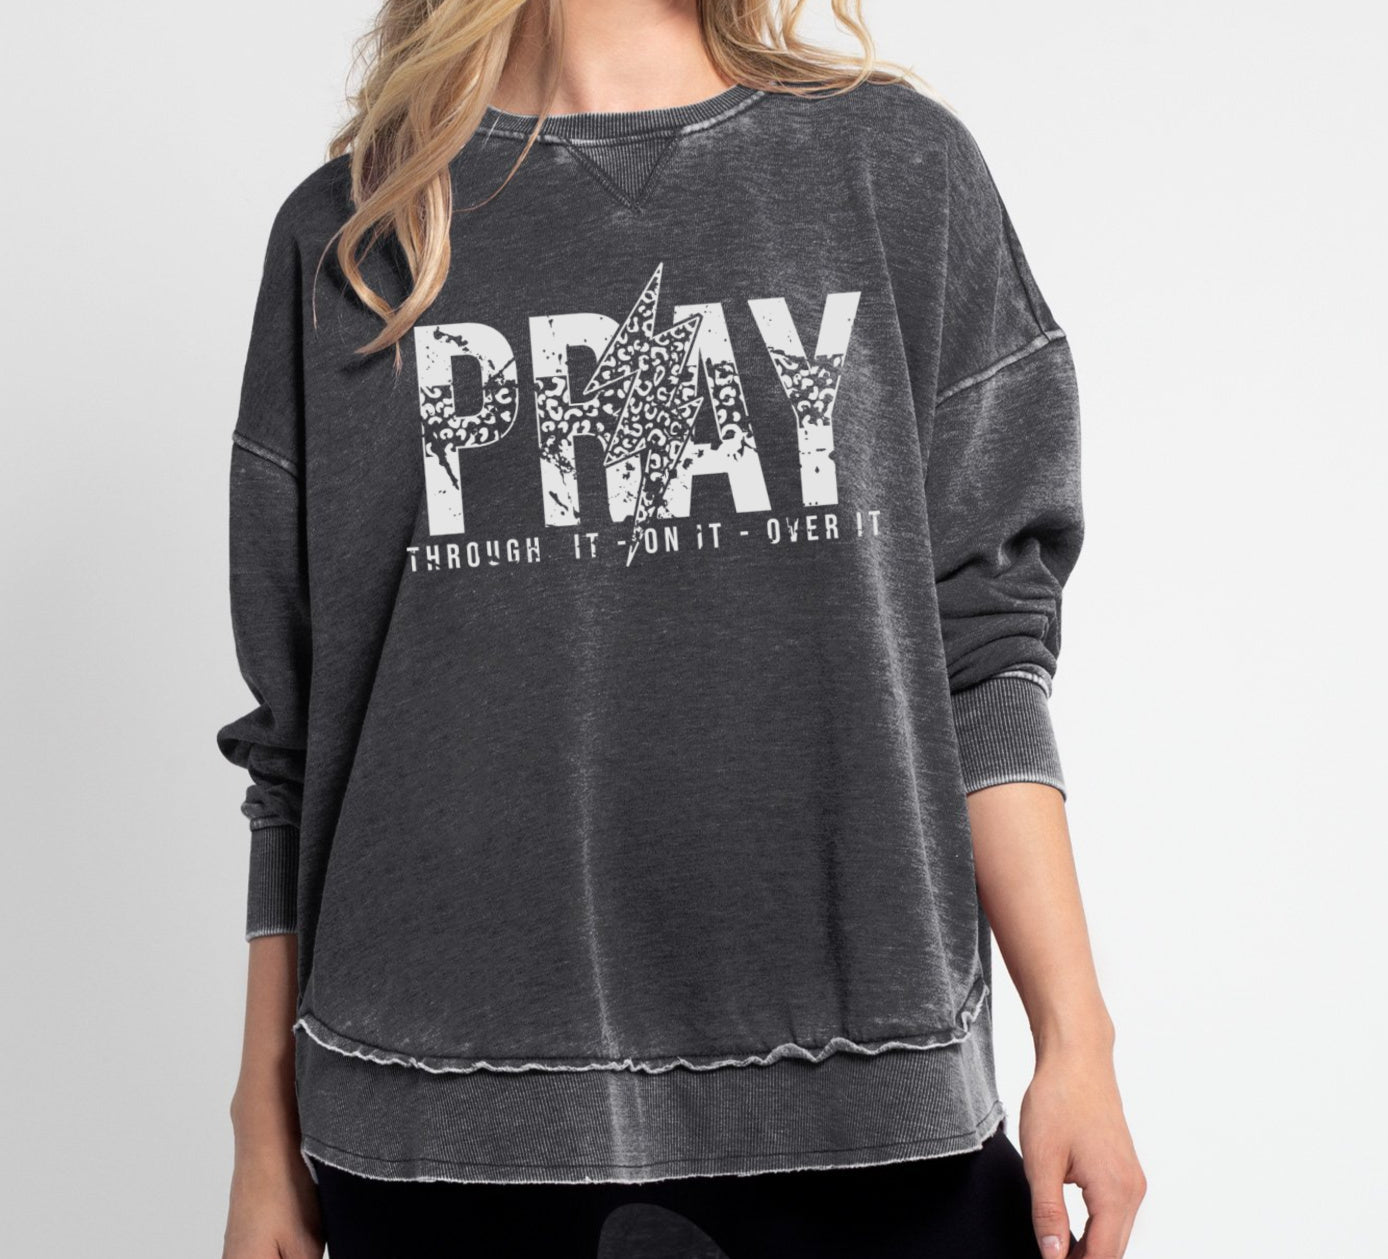 Acid Washed Pray - On It - Pray Over It- Pray Through Itl Quality Sweatshirt - Sizes and Inventory Limited